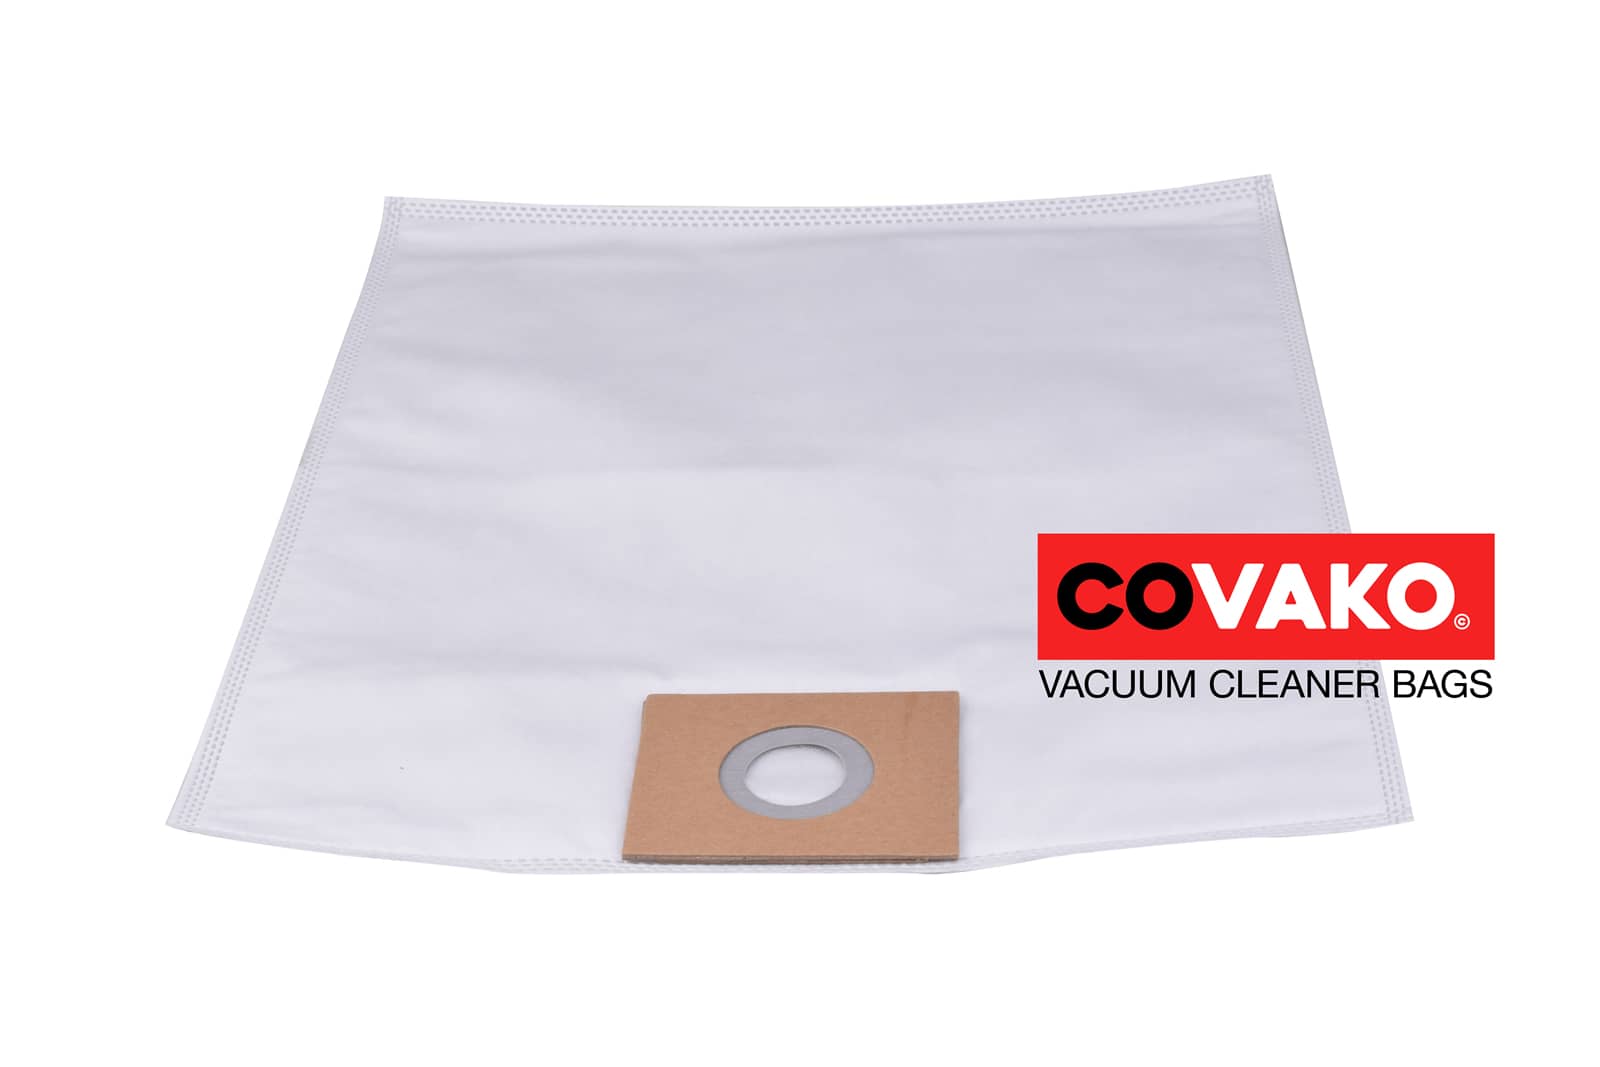 Fimap 223308 / Synthesis - Fimap vacuum cleaner bags